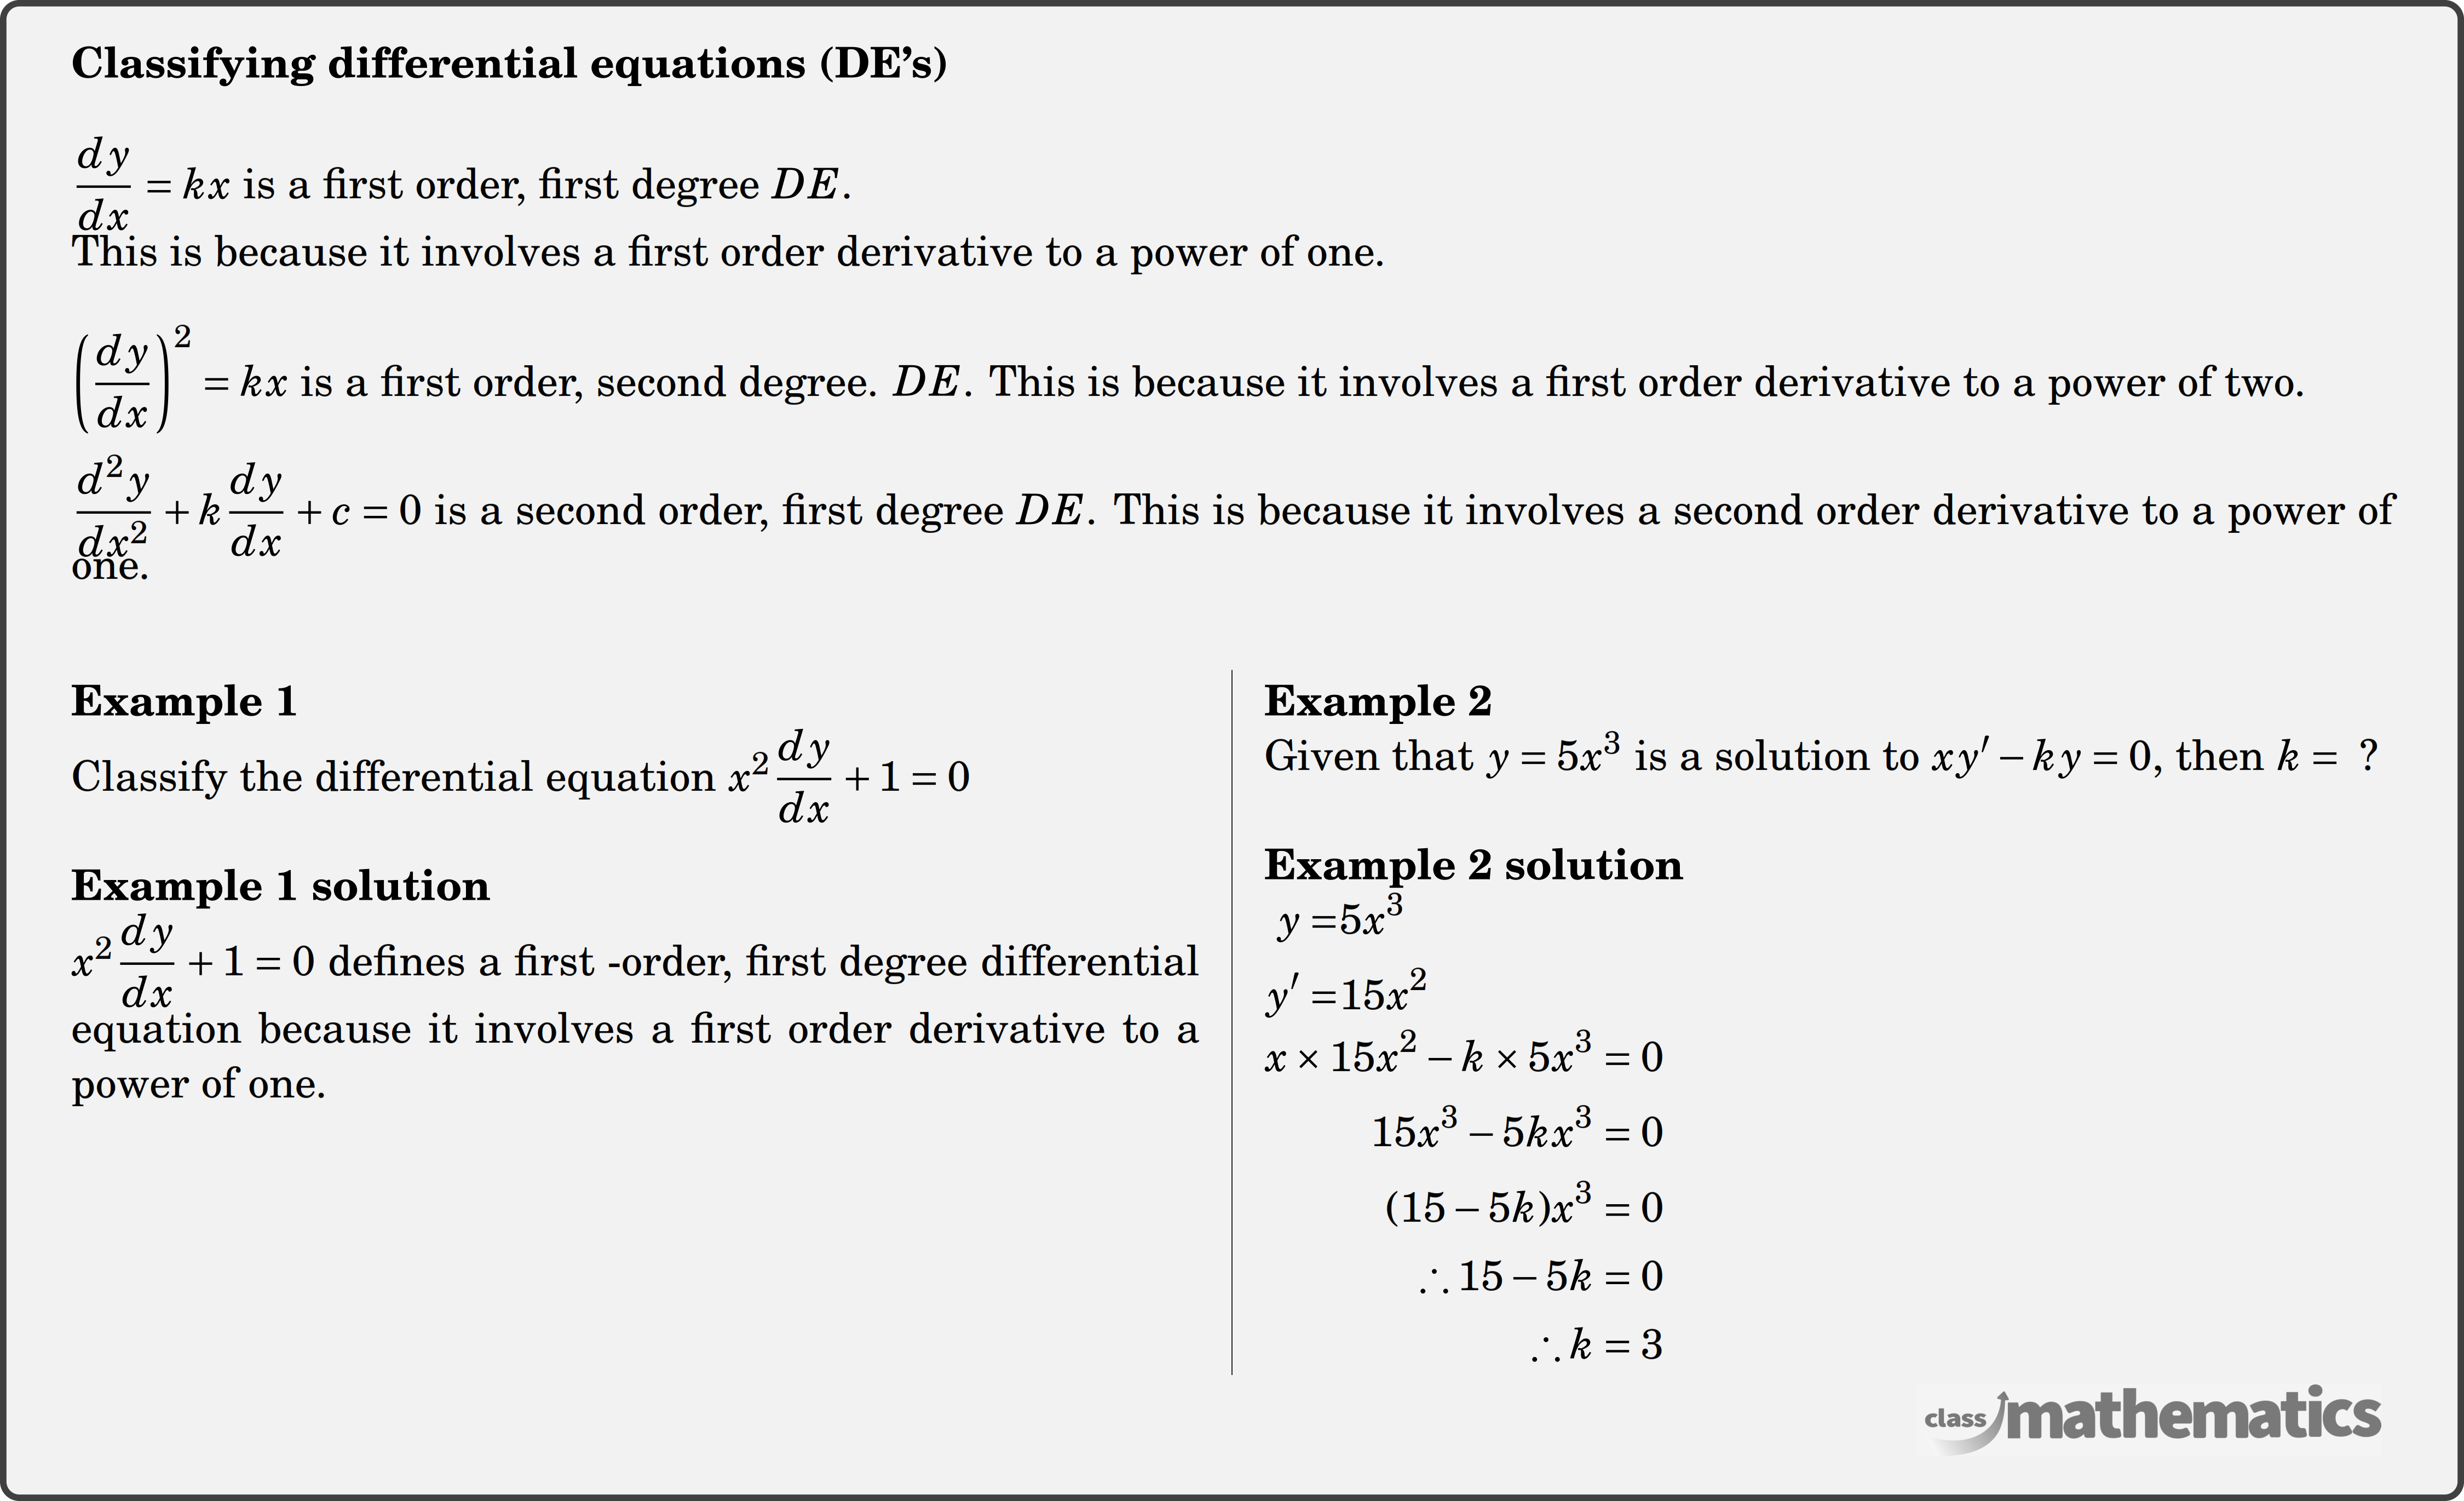 \textbf{Classifying differential equations (DE's)} \\  \(\dfrac{d y}{d x}=k x\) is a first order, first degree \(D E\).\\ This is because it involves a first order derivative to a power of one. \\  \(\left(\dfrac{d y}{d x}\right)^2=k x\) is a first order, second degree. \(D E\). This is because it involves a first order derivative to a power of two.\\  \(\dfrac{d^2 y}{d x^2}+k \dfrac{d y}{d x}+c=0\) is a second order, first degree \(D E\). This is because it involves a second order derivative to a power of one.\\  \begin{multicols}{2}  \textbf{Example 1}\\ %question 123245 Classify the differential equation \(x^2 \dfrac{d y}{d x}+1=0\)\\  \textbf{Example 1 solution}\\ \(x^2 \dfrac{d y}{d x}+1=0\) defines a first -order, first degree differential equation because it involves a first order derivative to a power of one.\\  \columnbreak \textbf{Example 2}\\%question 123248 Given that \(y=5 x^3\) is a solution to \(x y^{\prime}-k y=0 \text {, then } k=\text { ? }\)\\  \textbf{Example 2 solution}\\ $\begin{aligned} y=&5 x^3 \\ y^{\prime}=&15 x^2 \end{aligned}$\\  $\begin{aligned} x \times 15 x^2-k \times 5 x^3&=0 \\ 15 x^3-5 k x^3&=0 \\ (15-5 k) x^3&=0 \\ \therefore 15-5 k&=0 \\ \therefore k&=3 \end{aligned}$ \end{multicols}